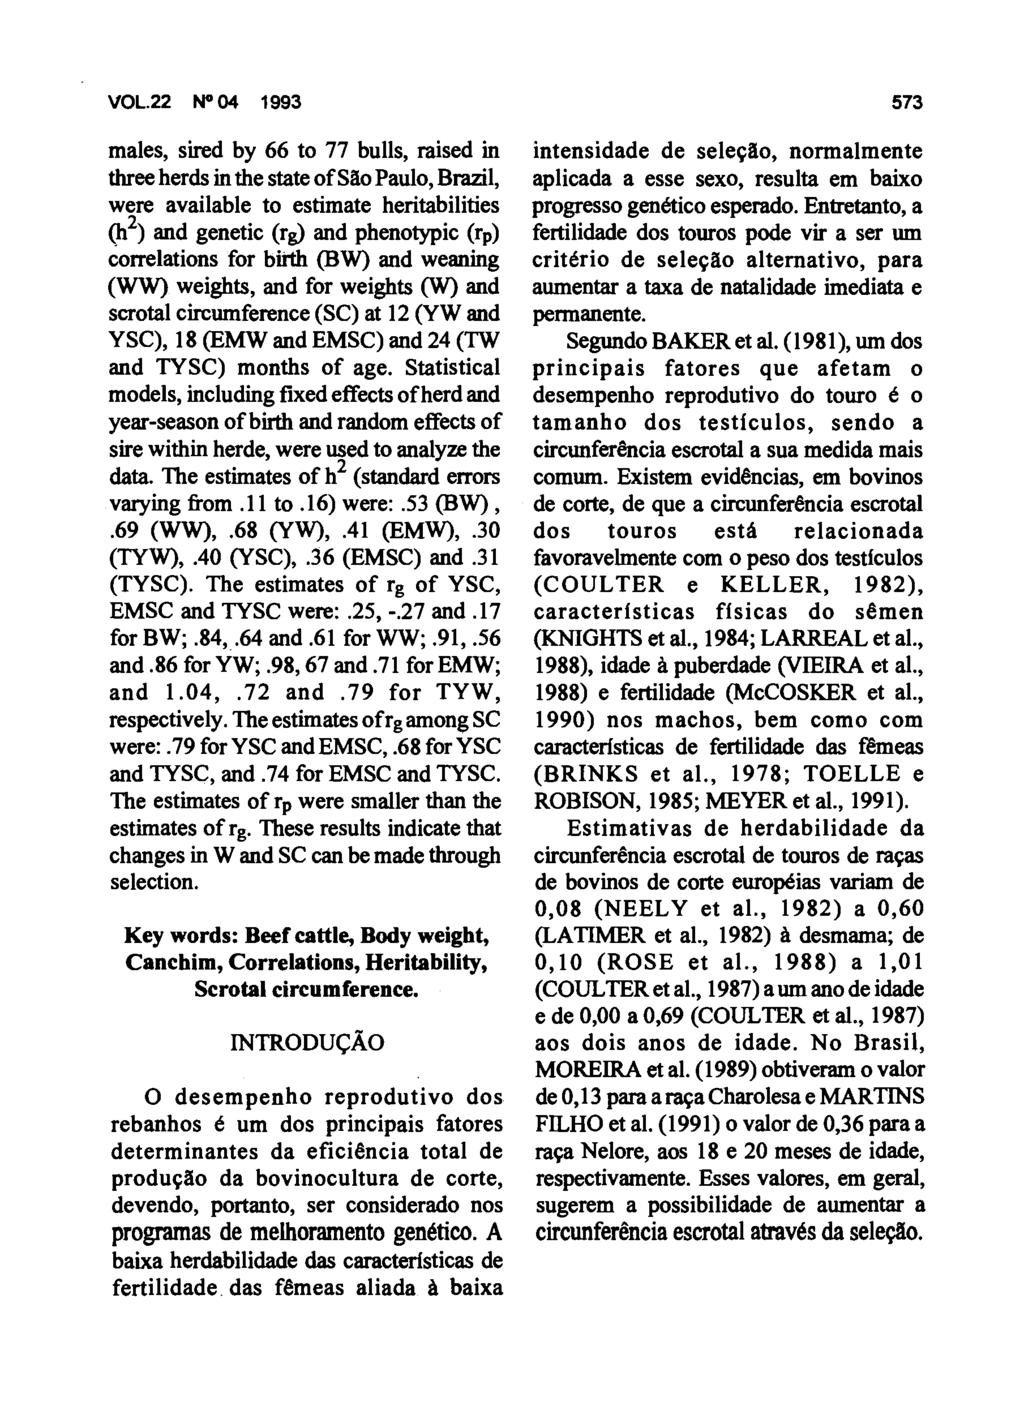 VOL.22 N" 04 1993 males, sired by 66 to 77 bulis, raised in three herds in the state ofsão Paulo, Brazil, were available to estimate heritabilities (h2) and genetic (rg) and phenotypic (rp)